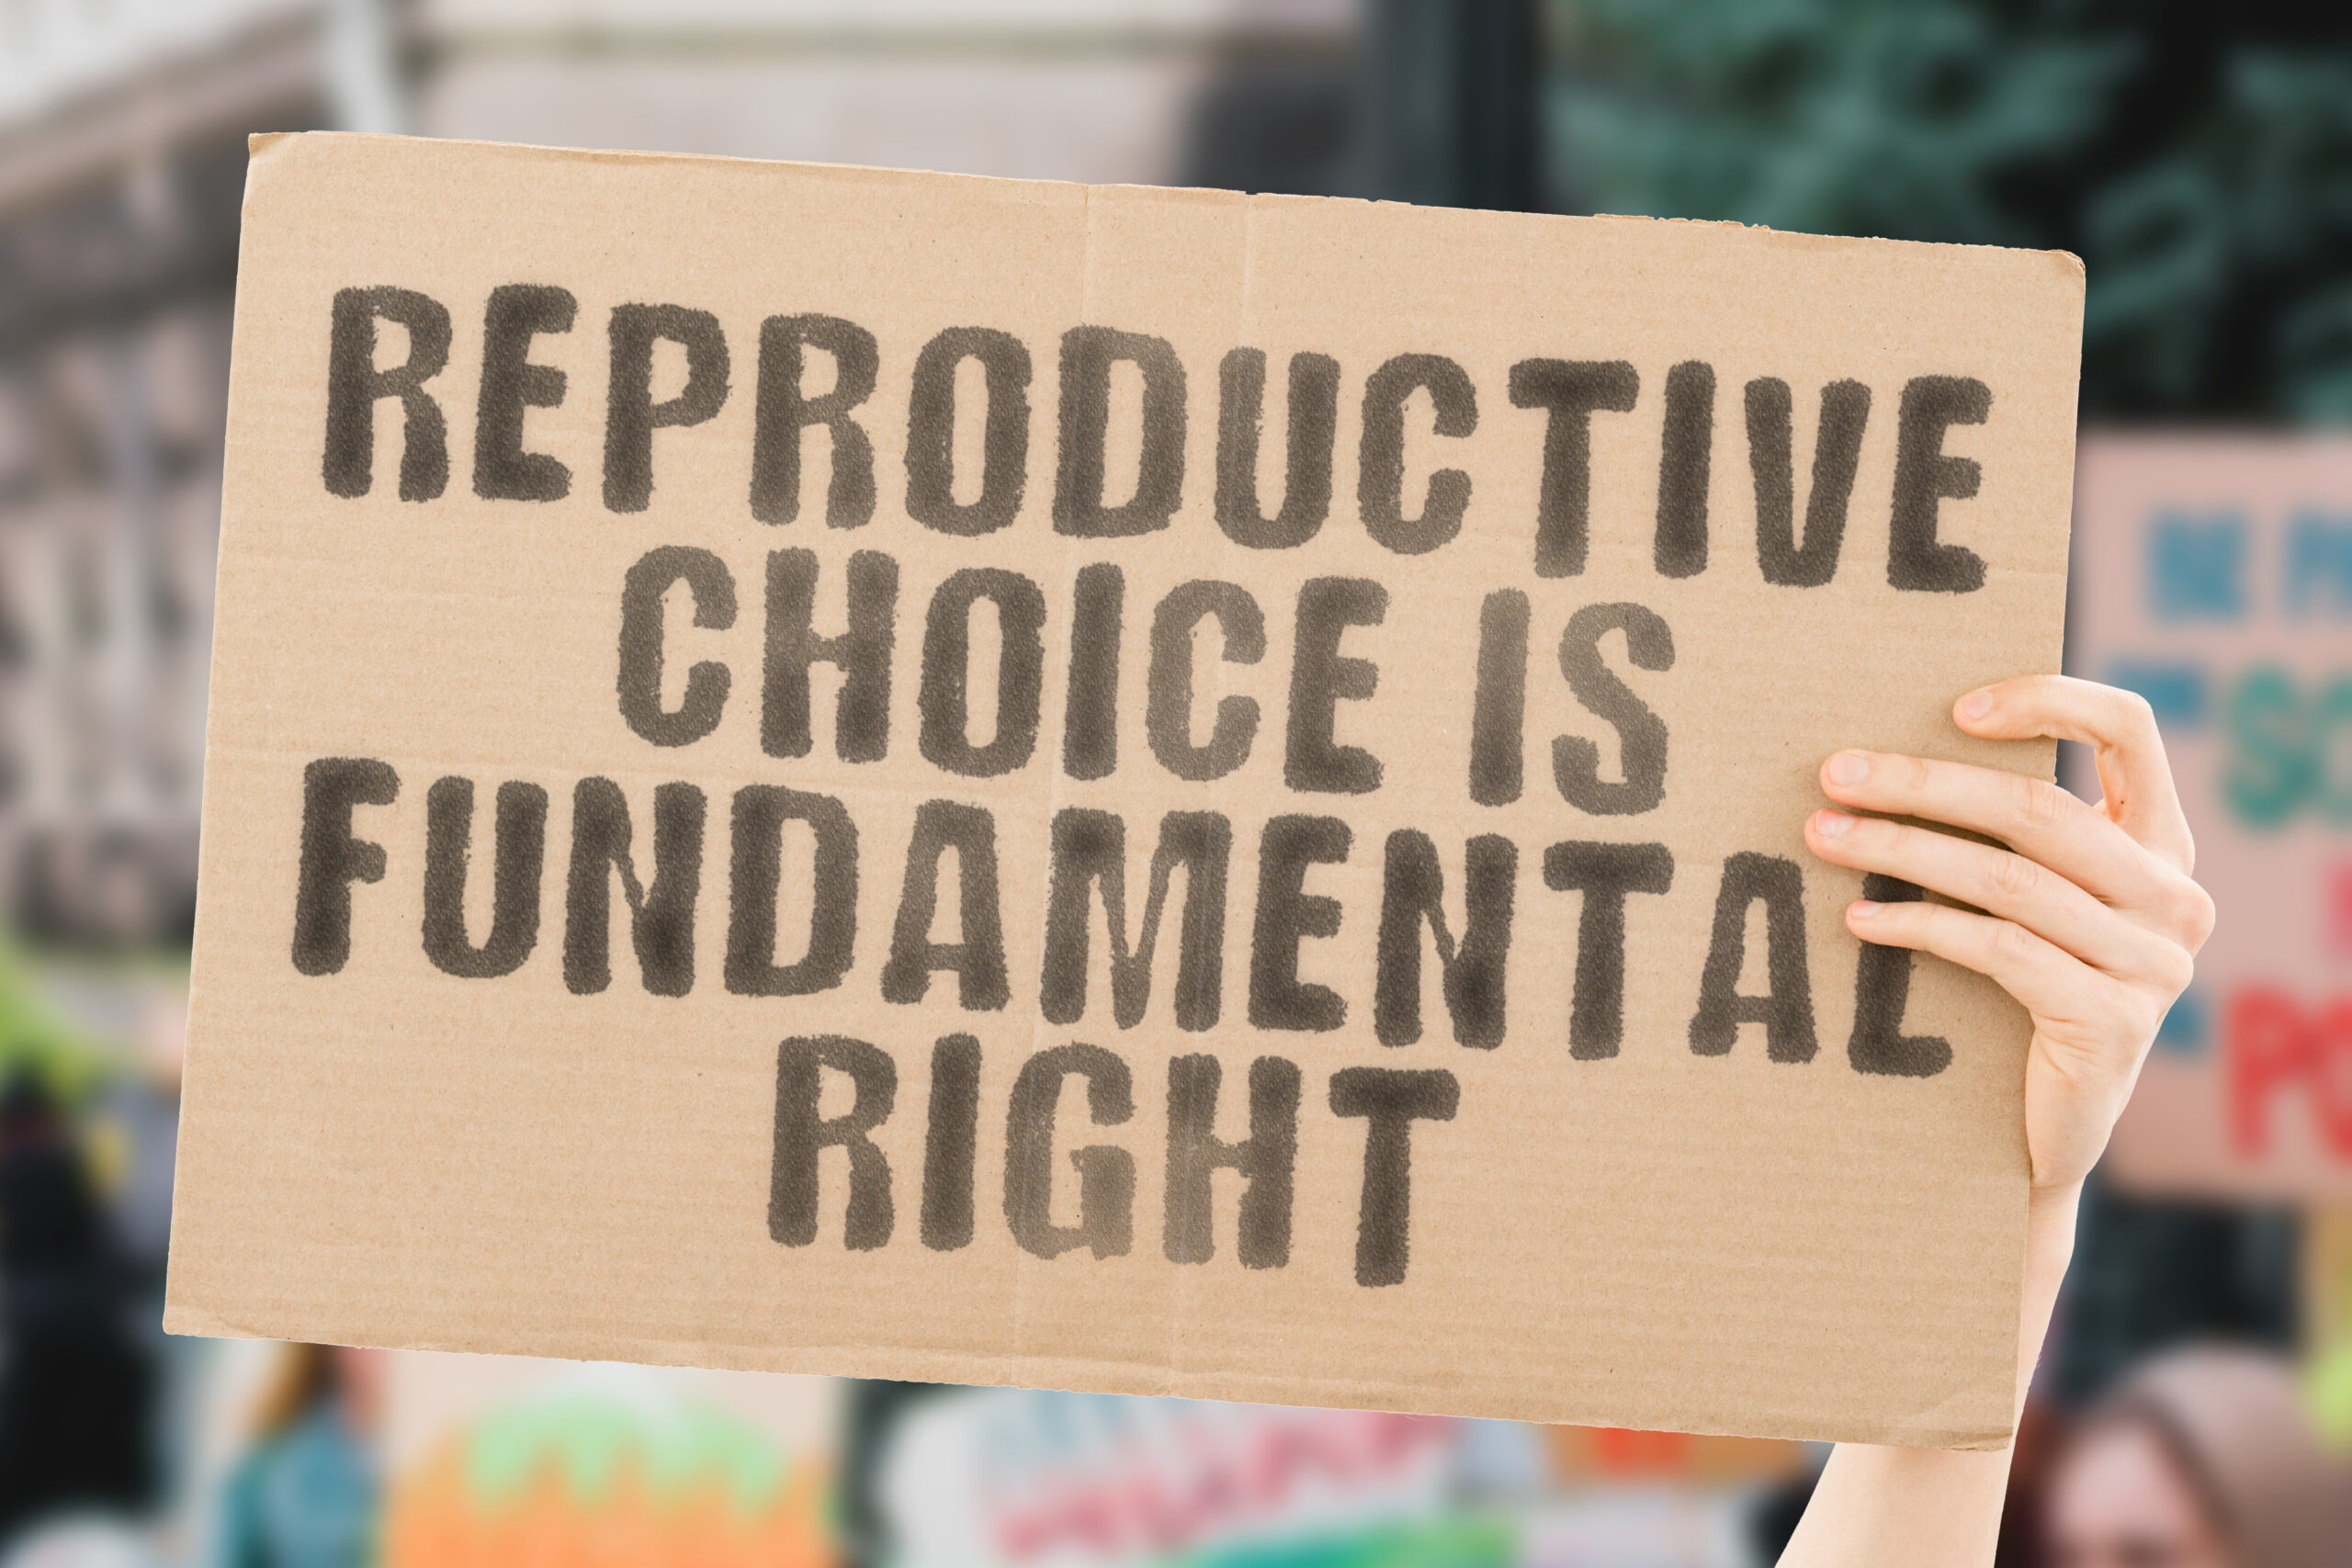 The,Phrase,",Reproductive,Choice,Is,Fundamental,Right,",On